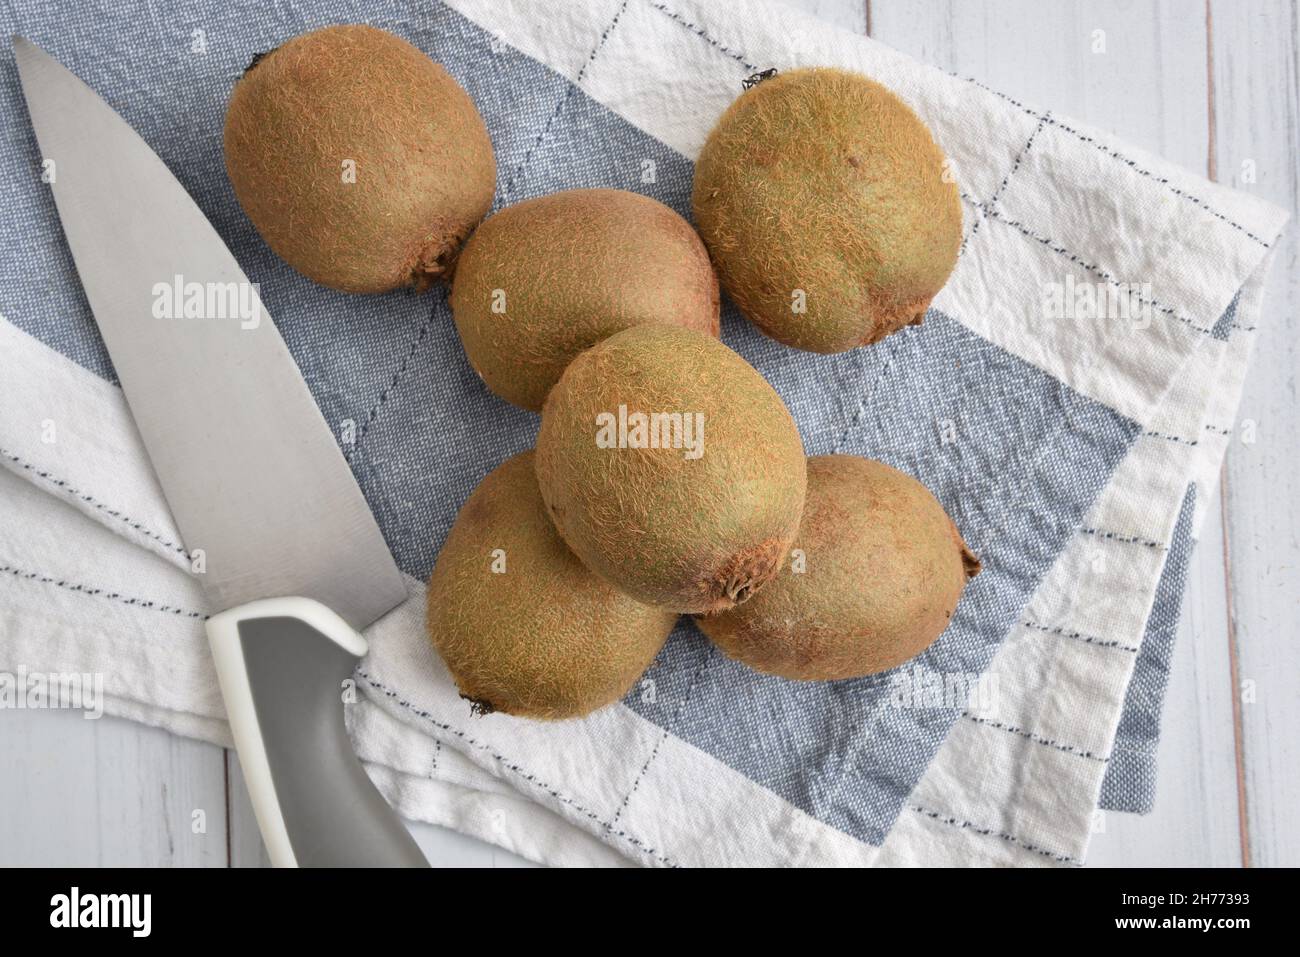 Overhead view of organic kiwi fruit on a towel with a kitchen knife Stock Photo